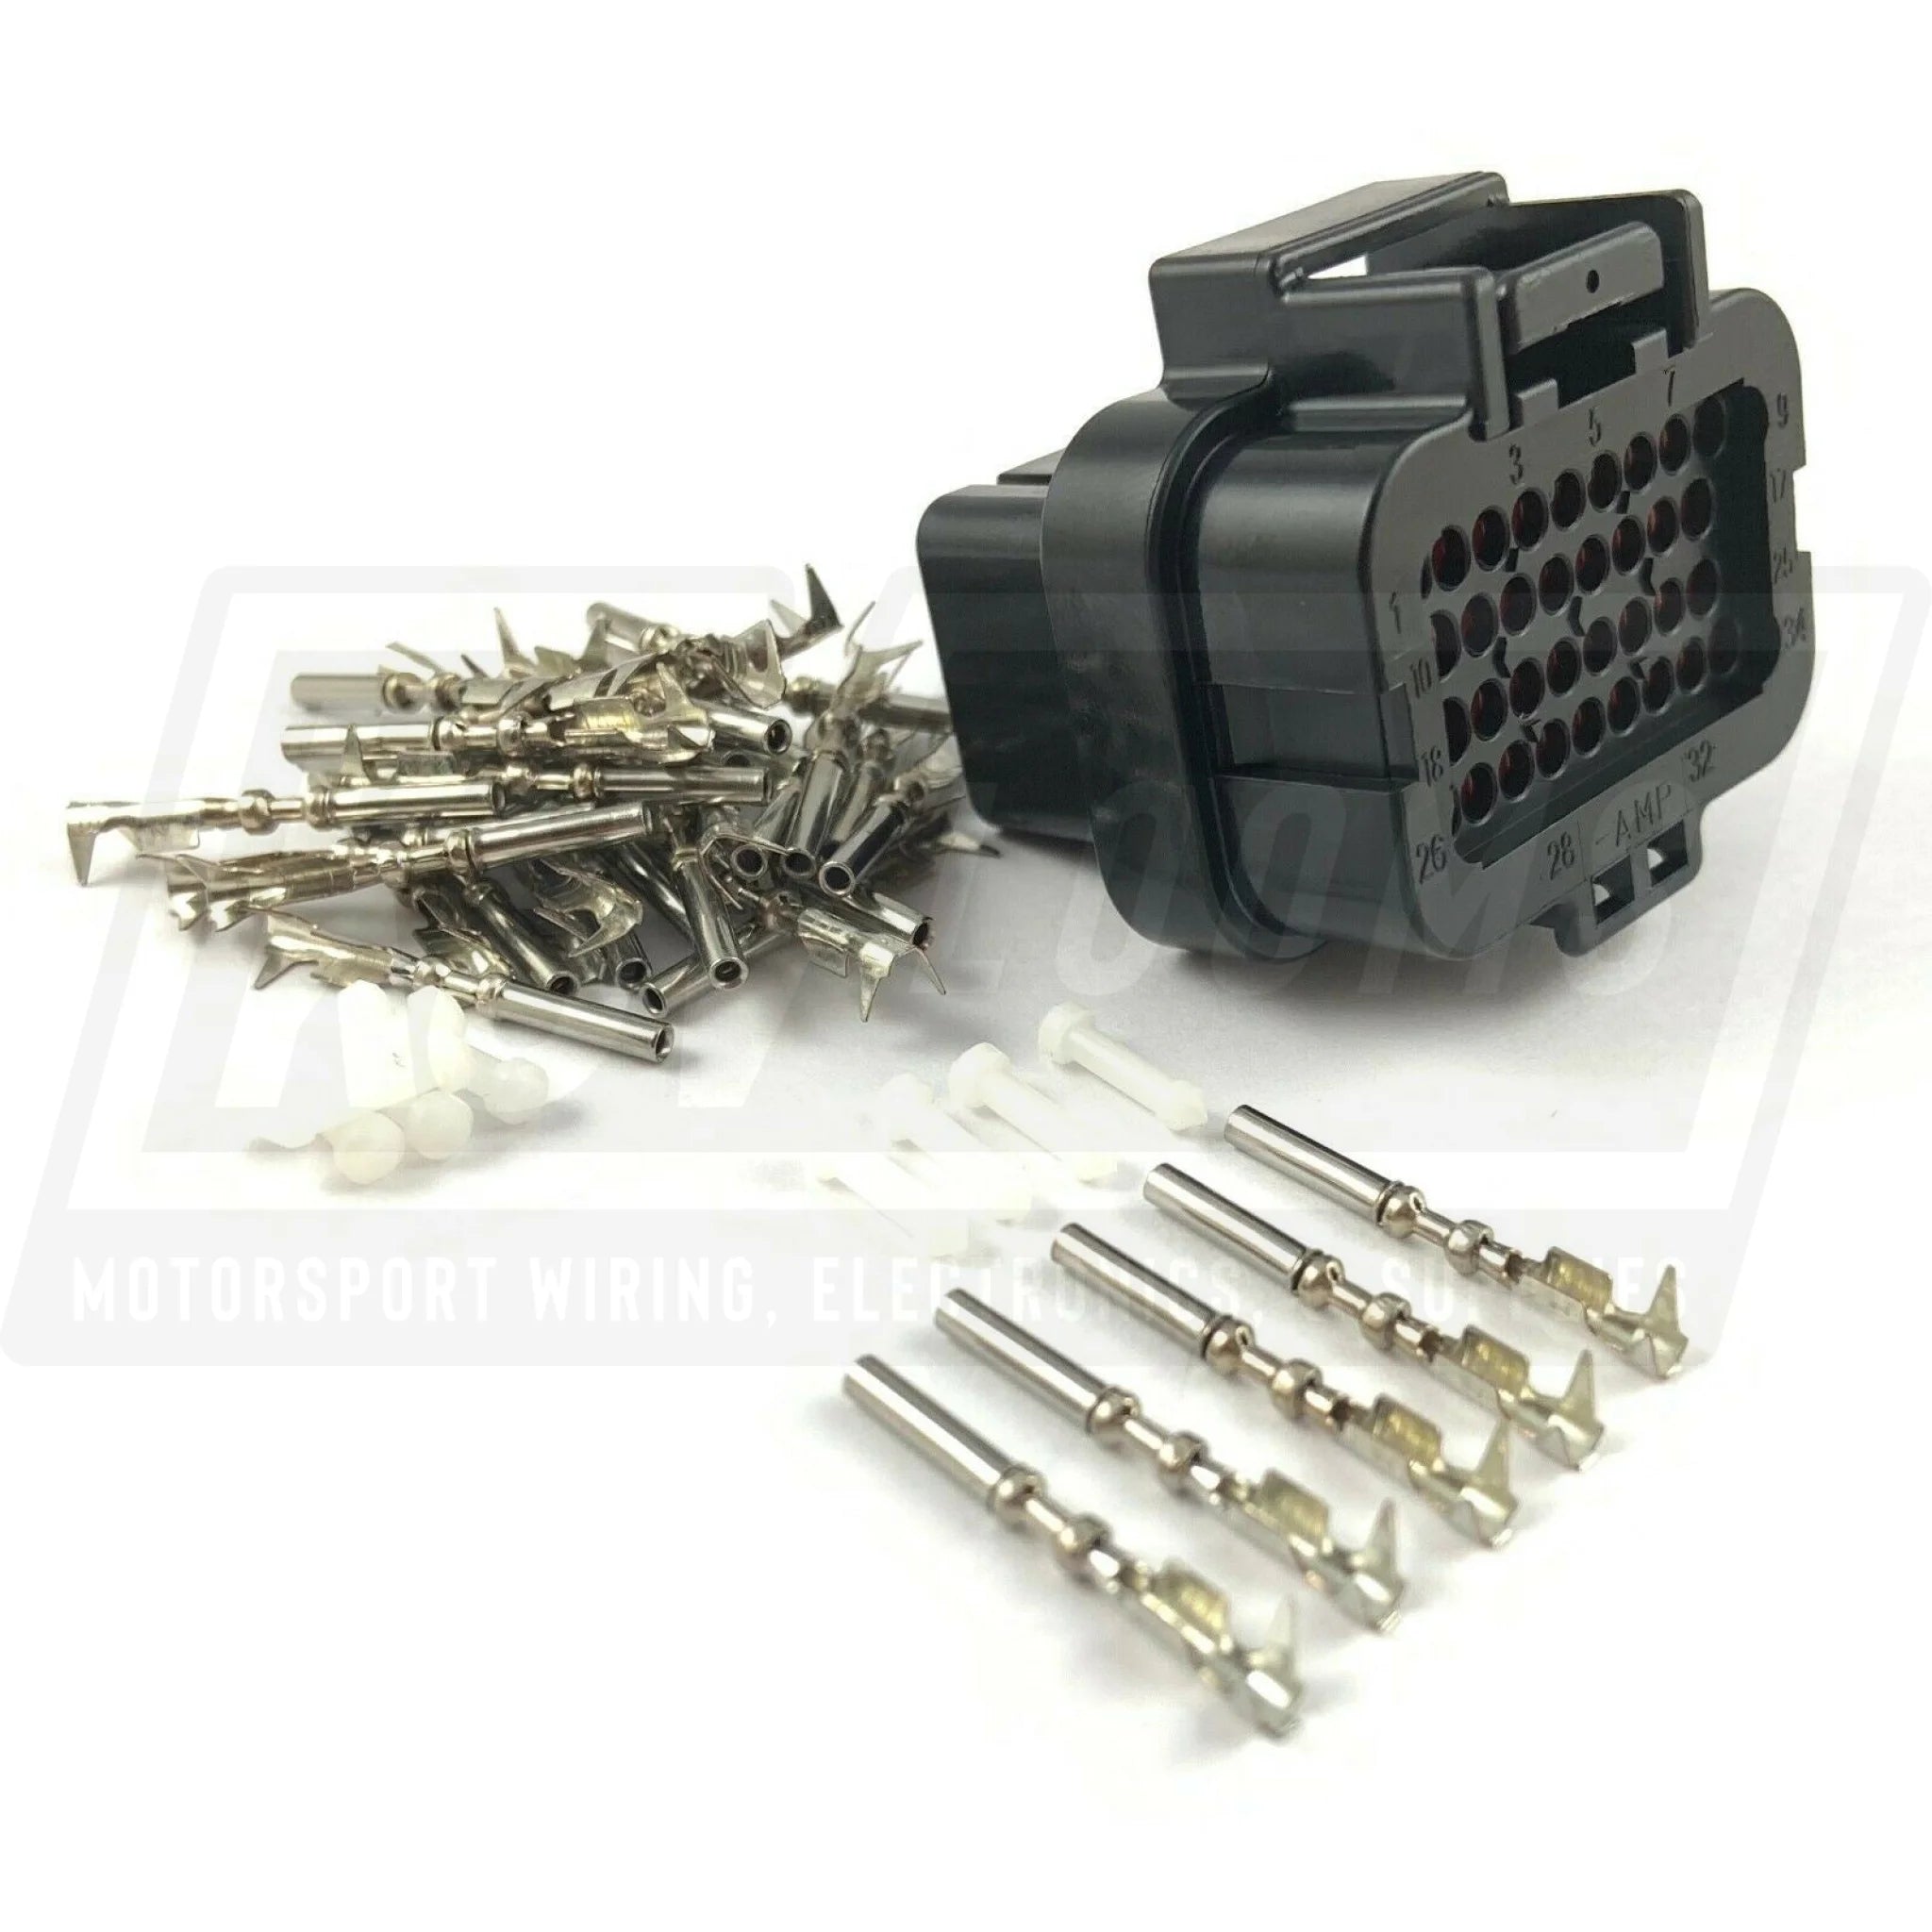 34-Way Connector Kit For Motec M150 Ecu C (24-20 Awg)